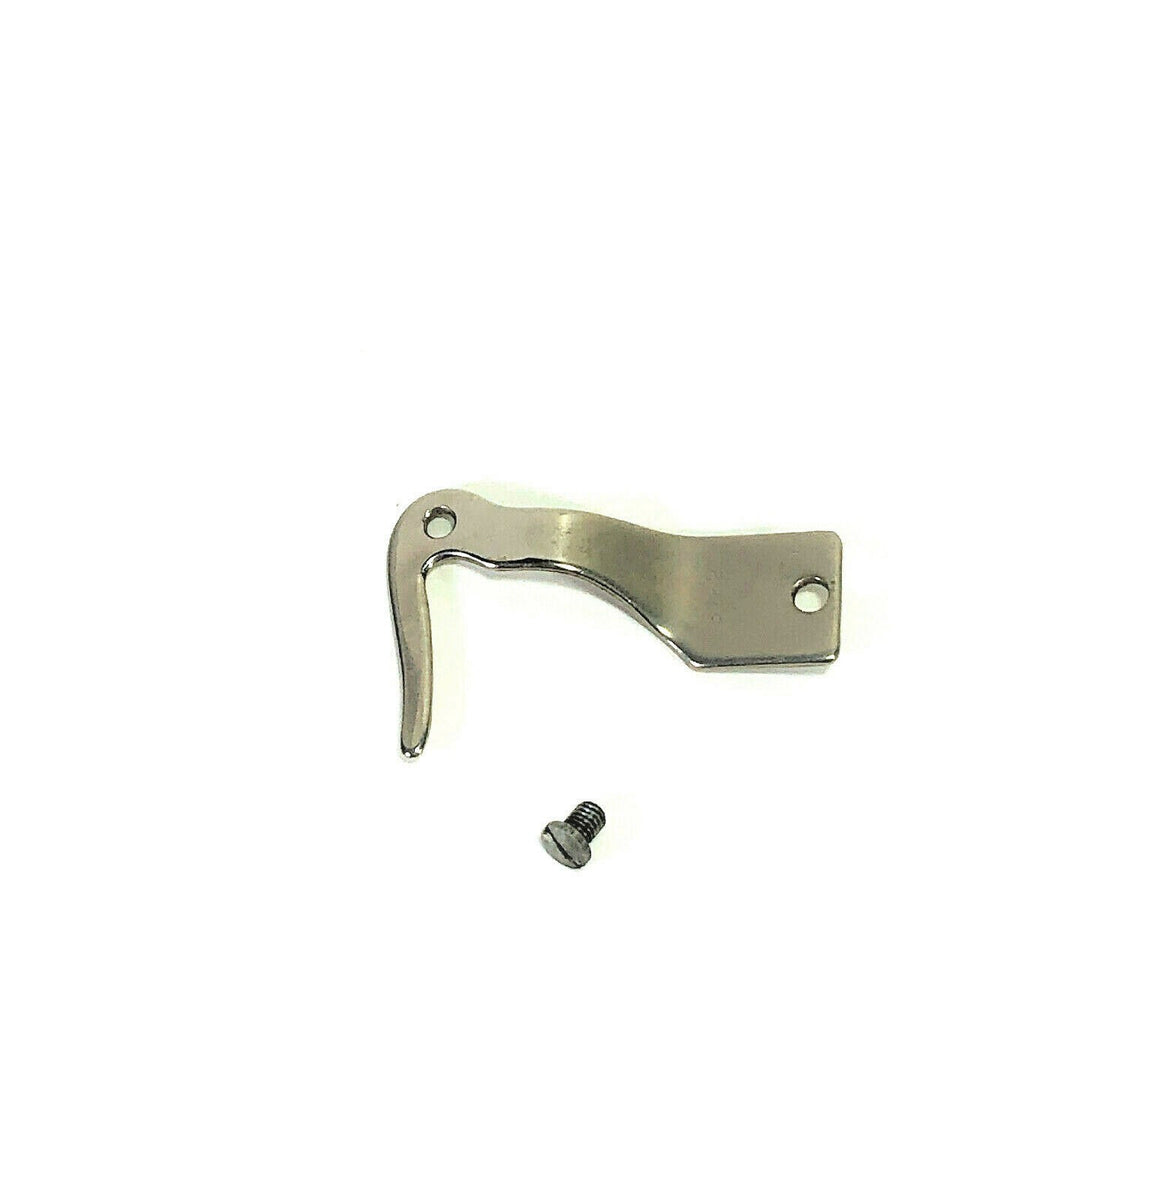 Singer 66 Sewing Machine Thread Take Up Lever Assembly Simanco 32544 32541